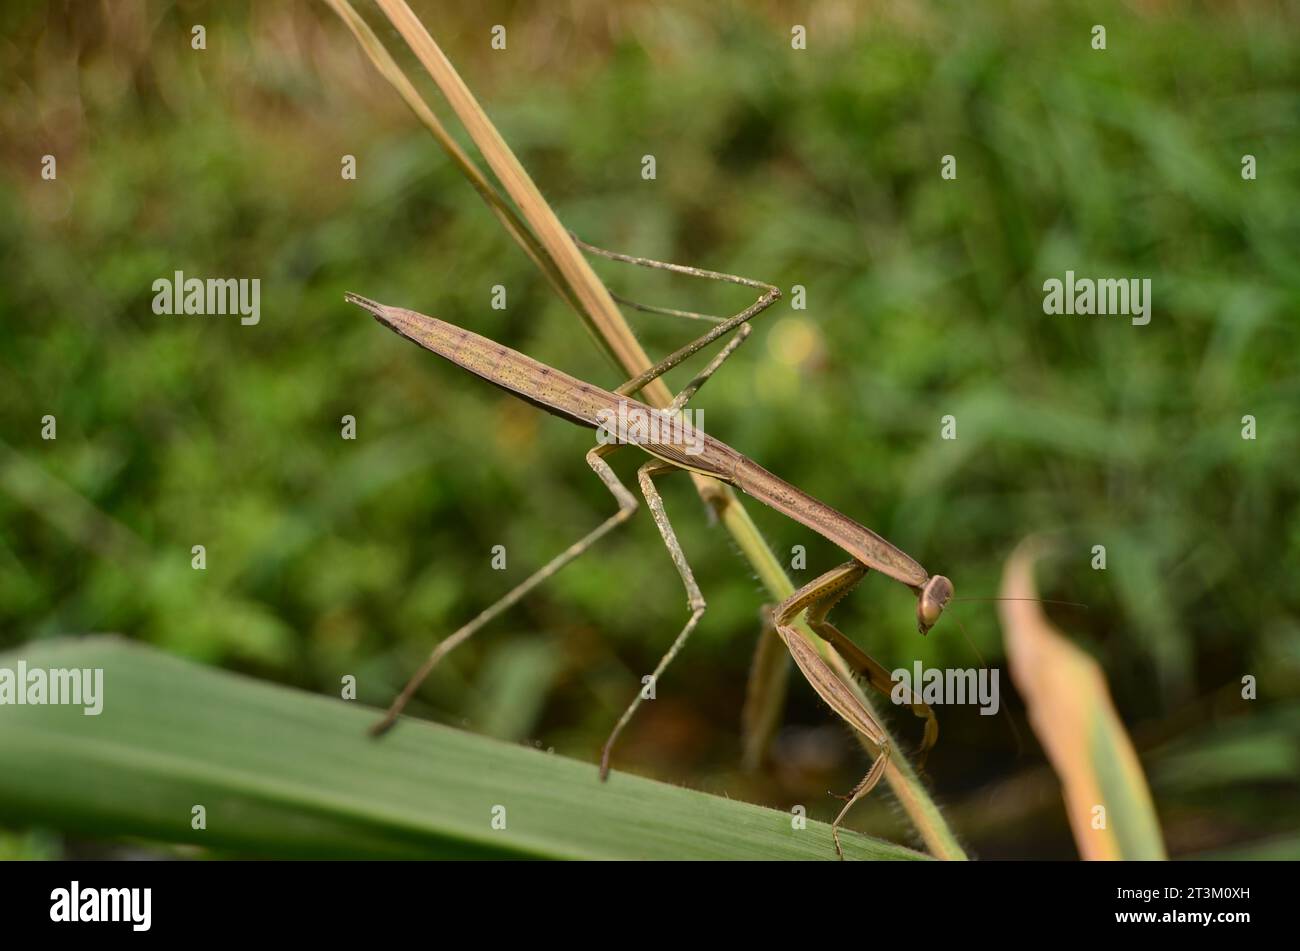 Statilia maculata, a species of long-bodied grasshopper with short wings, brownish-gray in color perched on a leaf stalk. Stock Photo